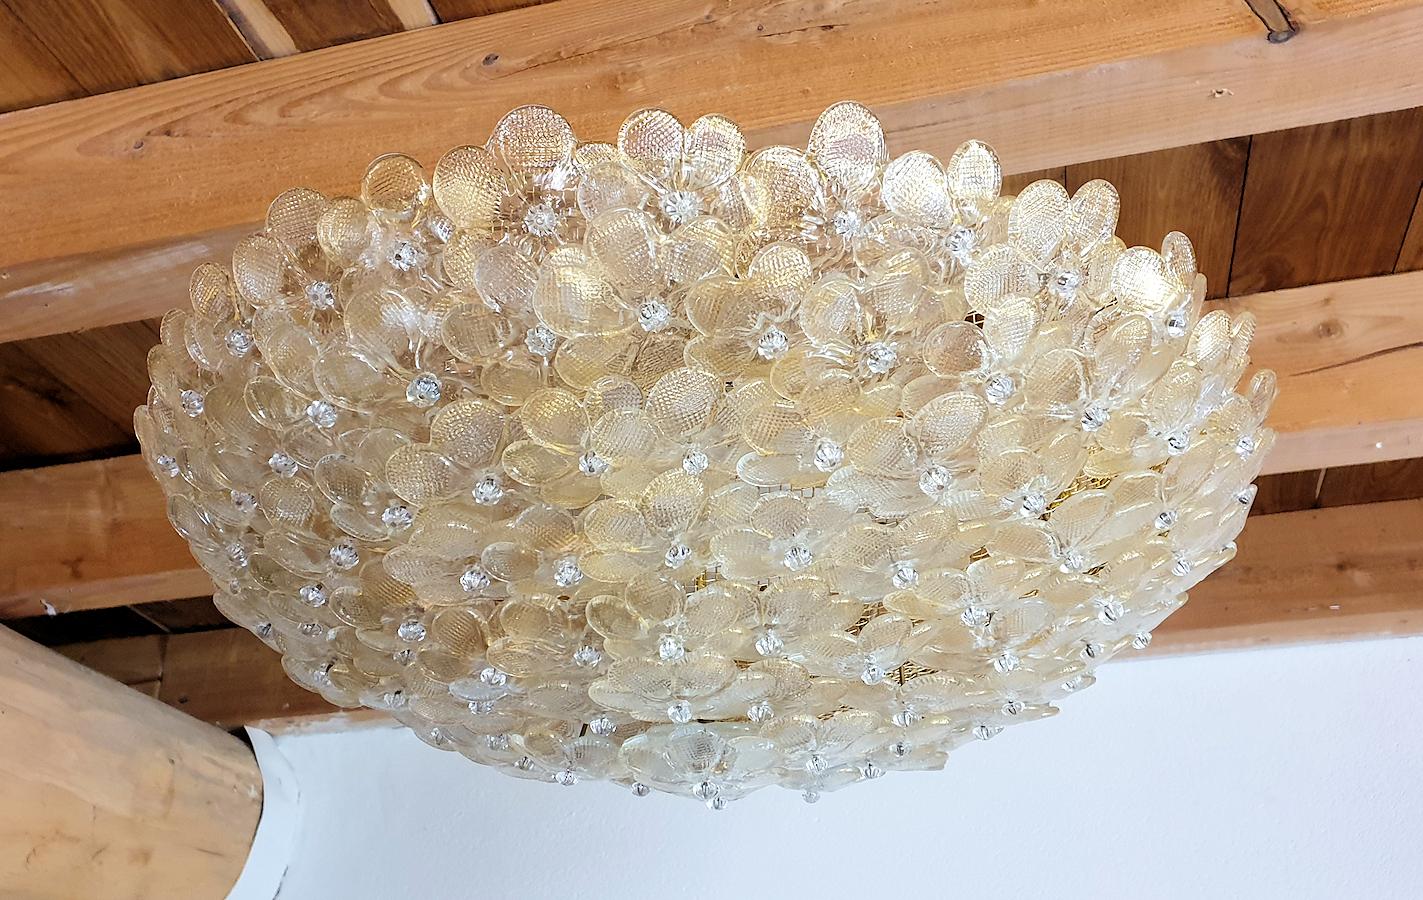 Large round neoclassical Mid-Century Modern, Murano glass gold and clear handmade flowers chandelier, or flush-mount ceiling light,
by Barovier & Toso, Italy, late 1970s.
The vintage Murano chandelier has brass finish mounts; with
6 lights each,